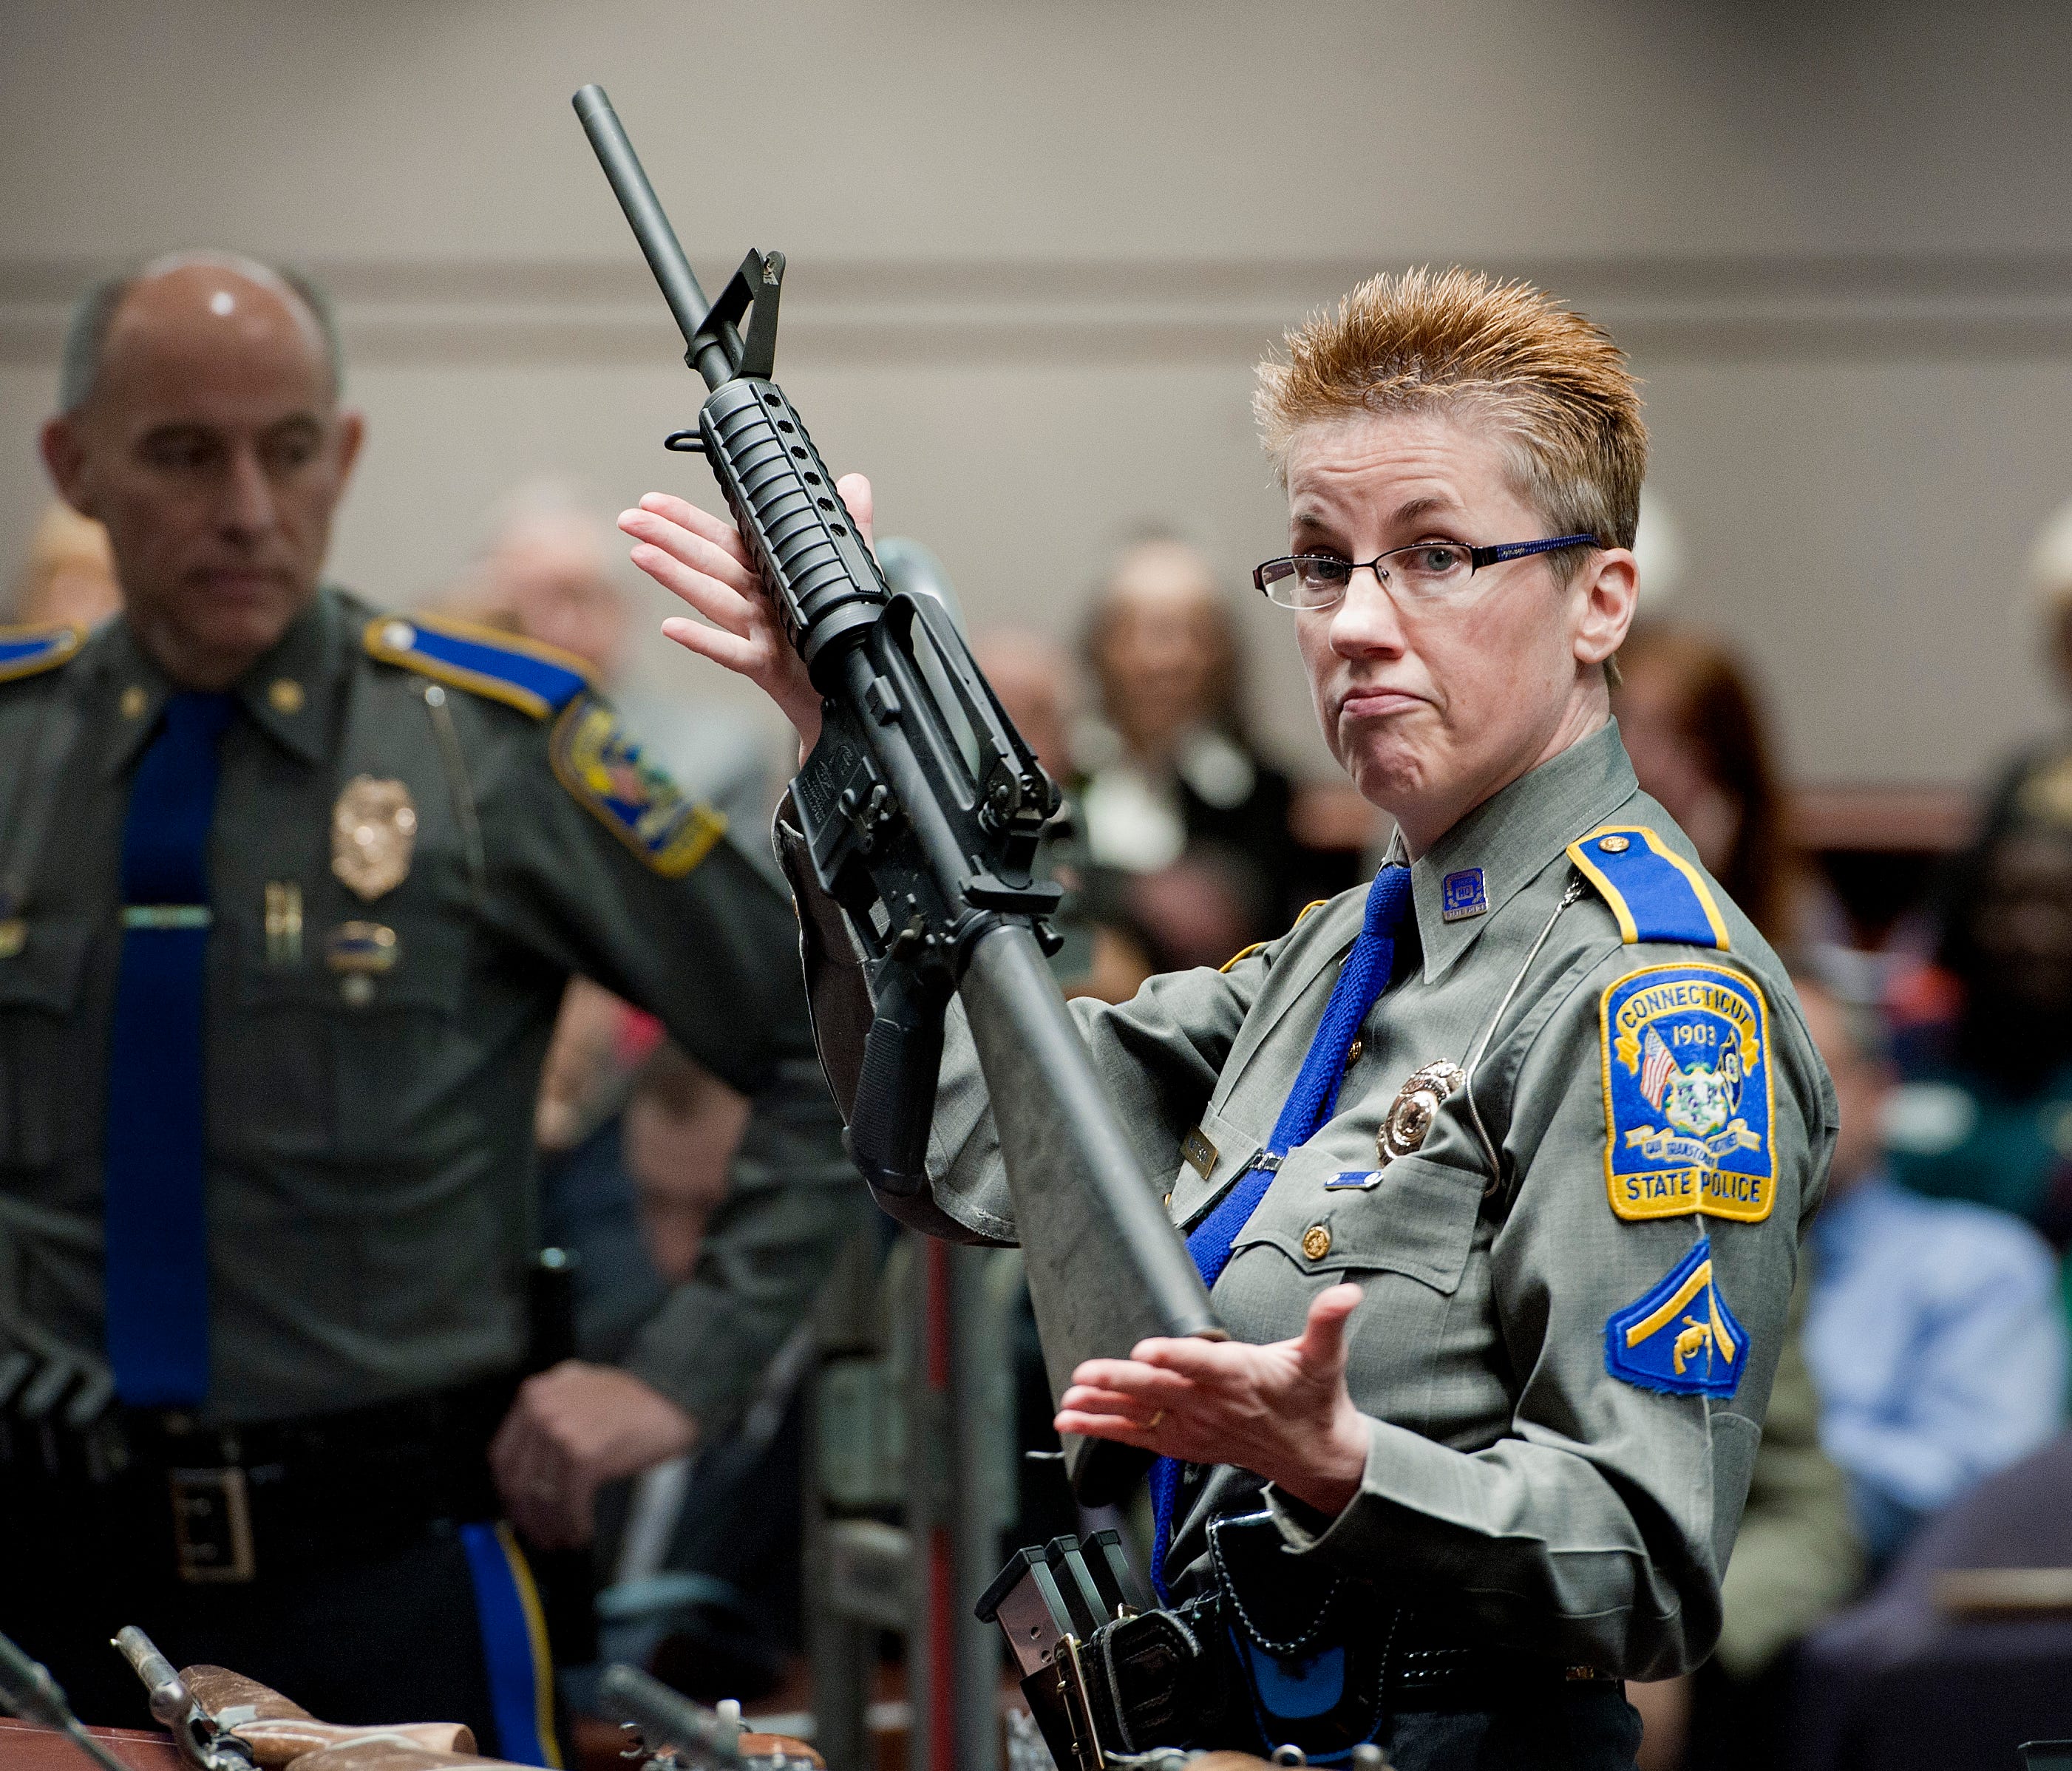 Firearms training unit Detective Barbara J. Mattson, of the Connecticut State Police, holds up a Bushmaster AR-15 rifle, the same make and model of gun used by Adam Lanza in the Sandy Hook School shooting, during a hearing of a legislative subcommitt